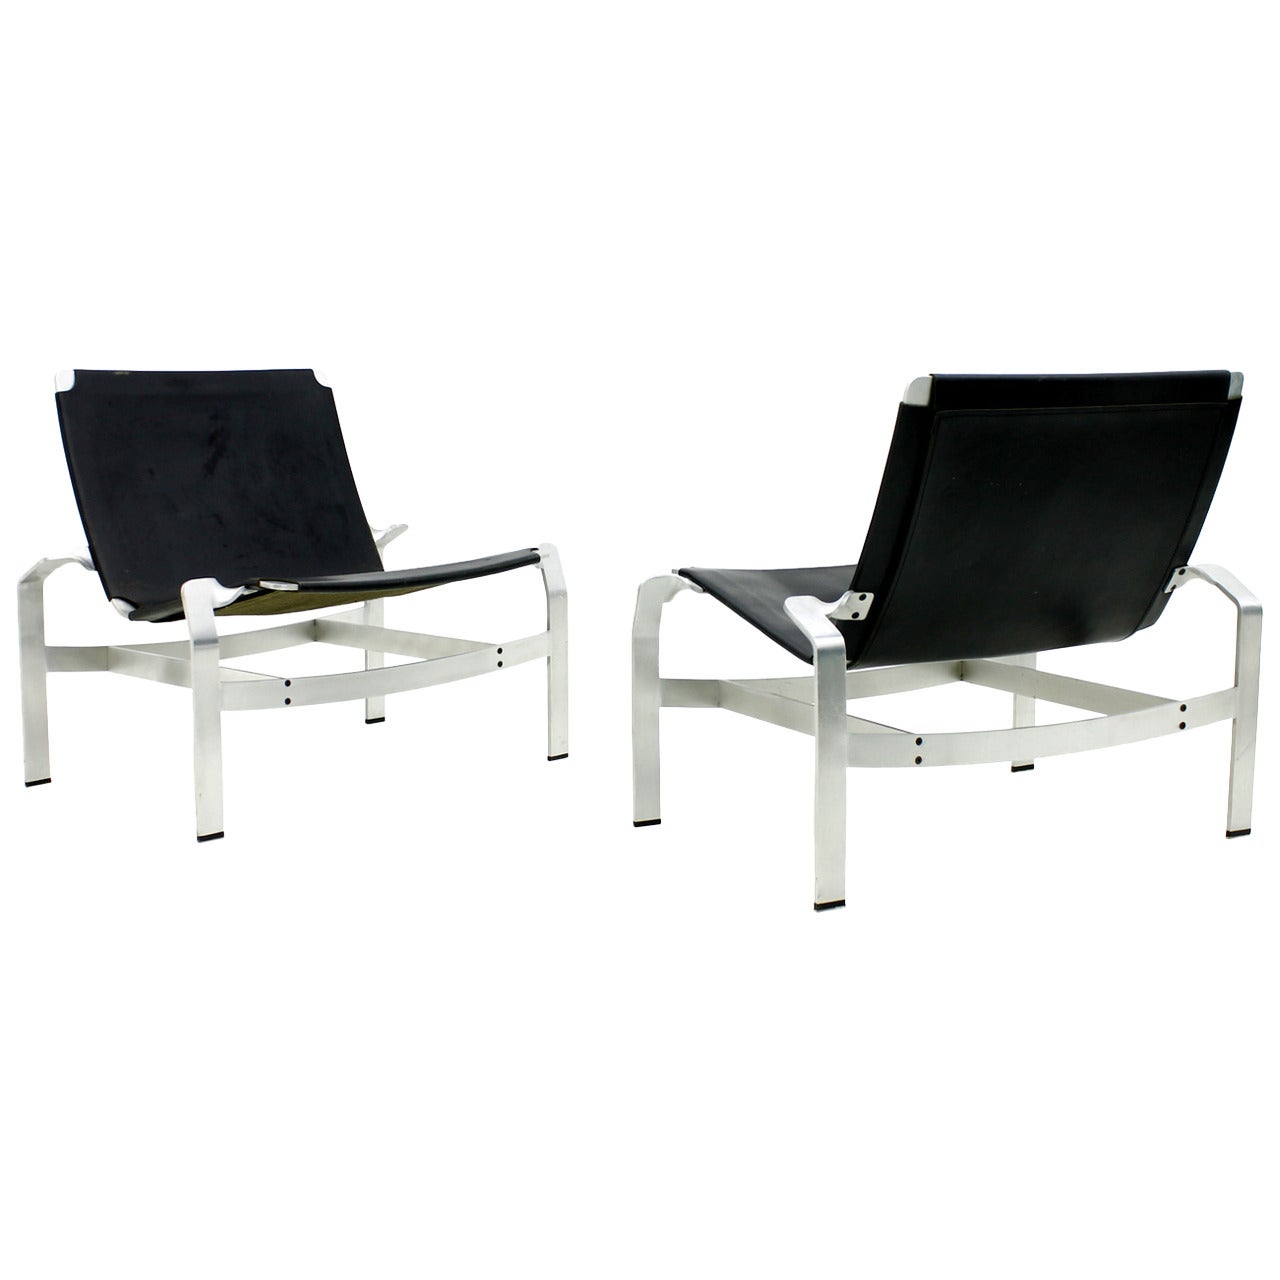 Pair of Lounge Chairs in Aluminum and Leather, Attributed to David De Majo